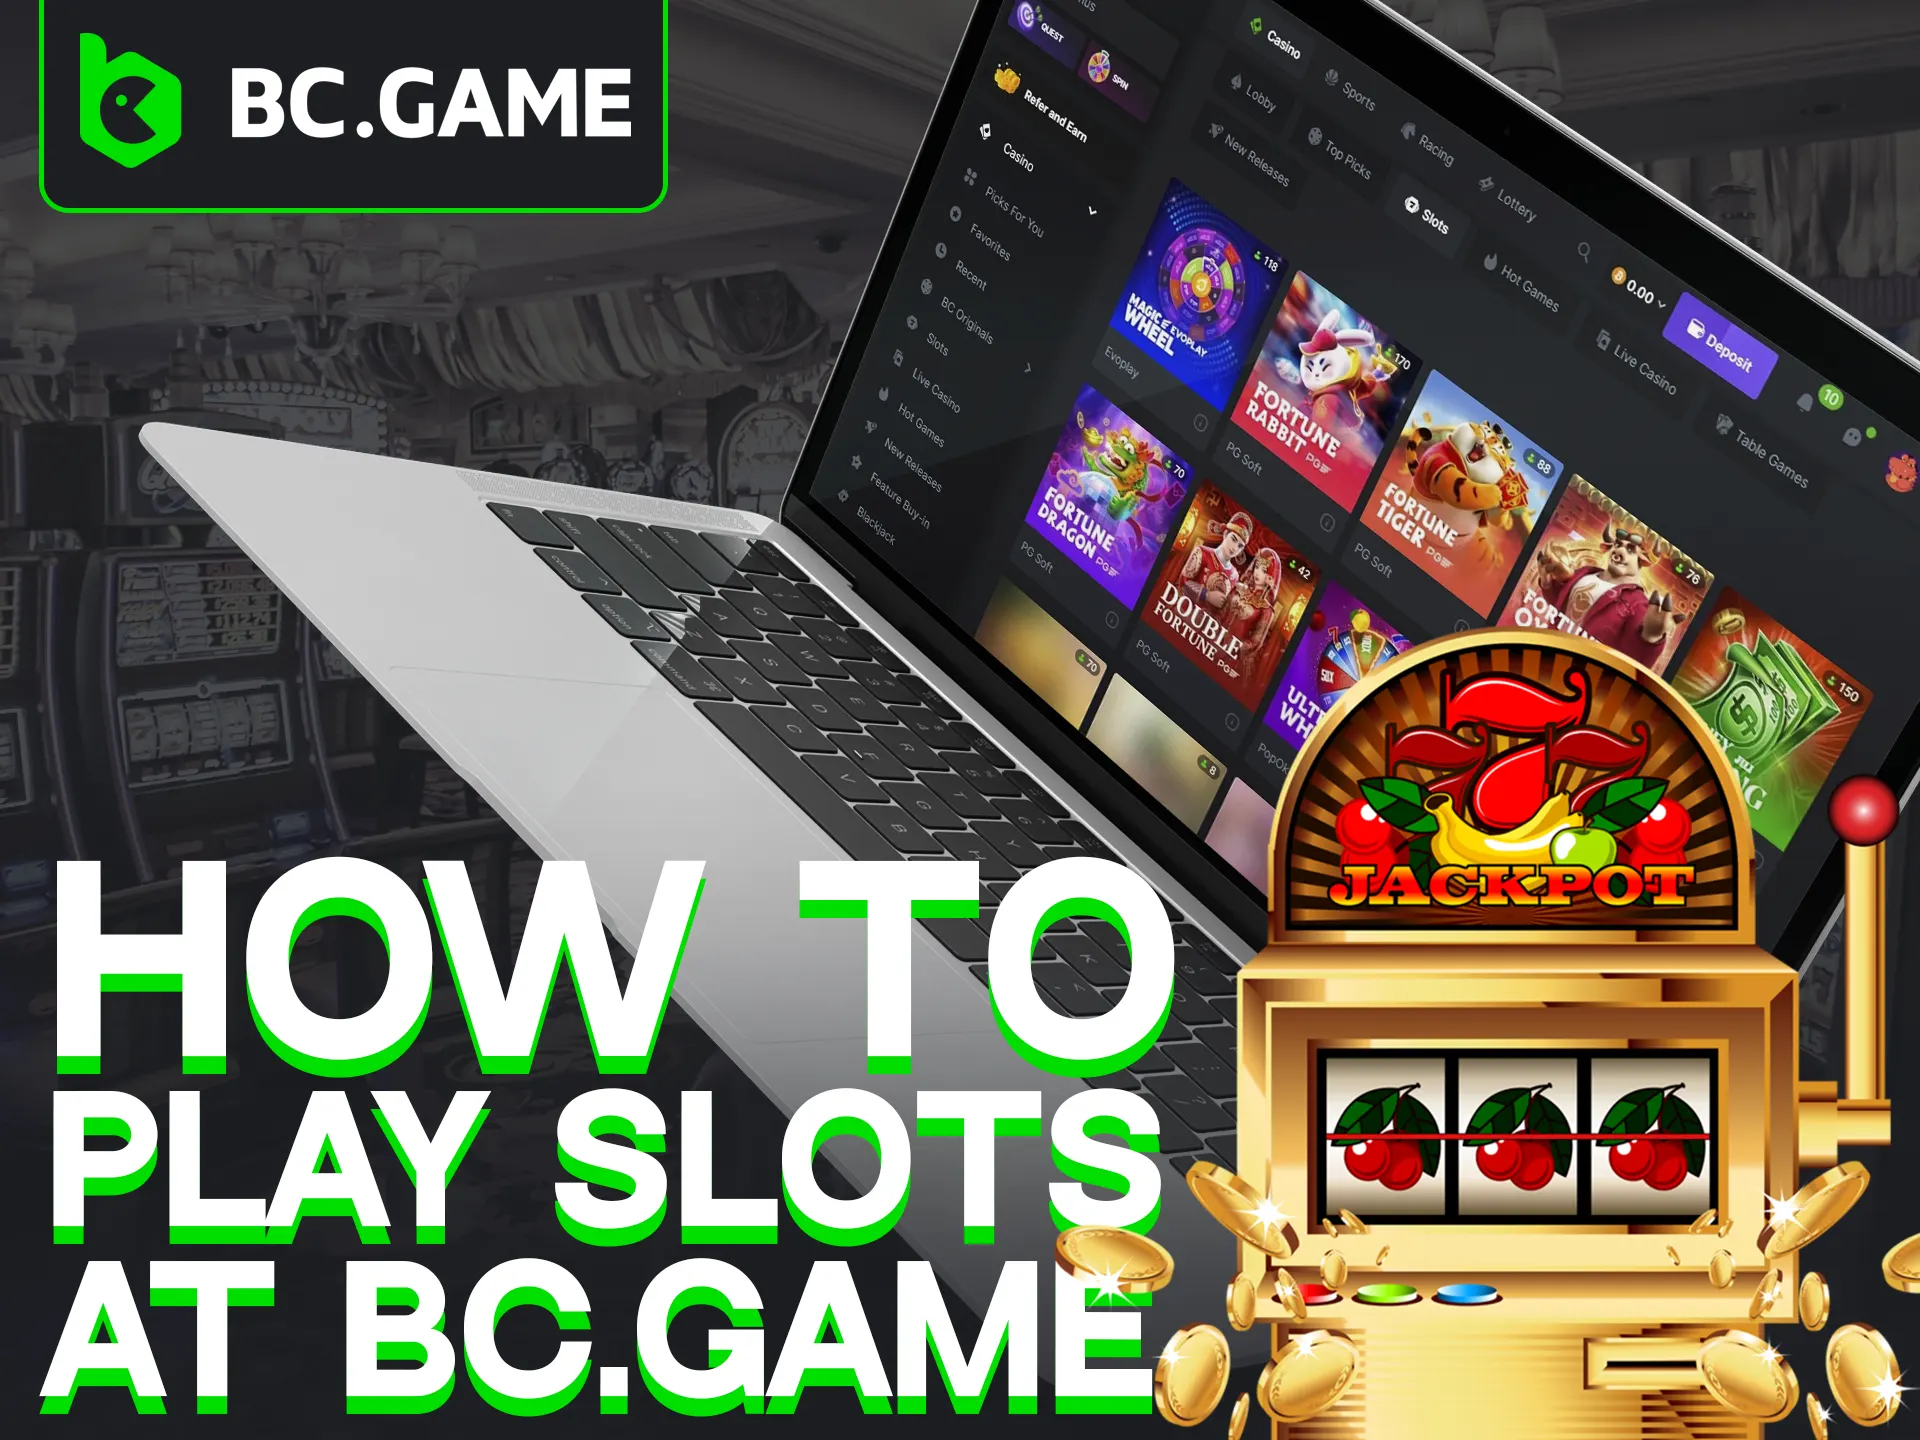 Start playing slots at BC Game with ease.